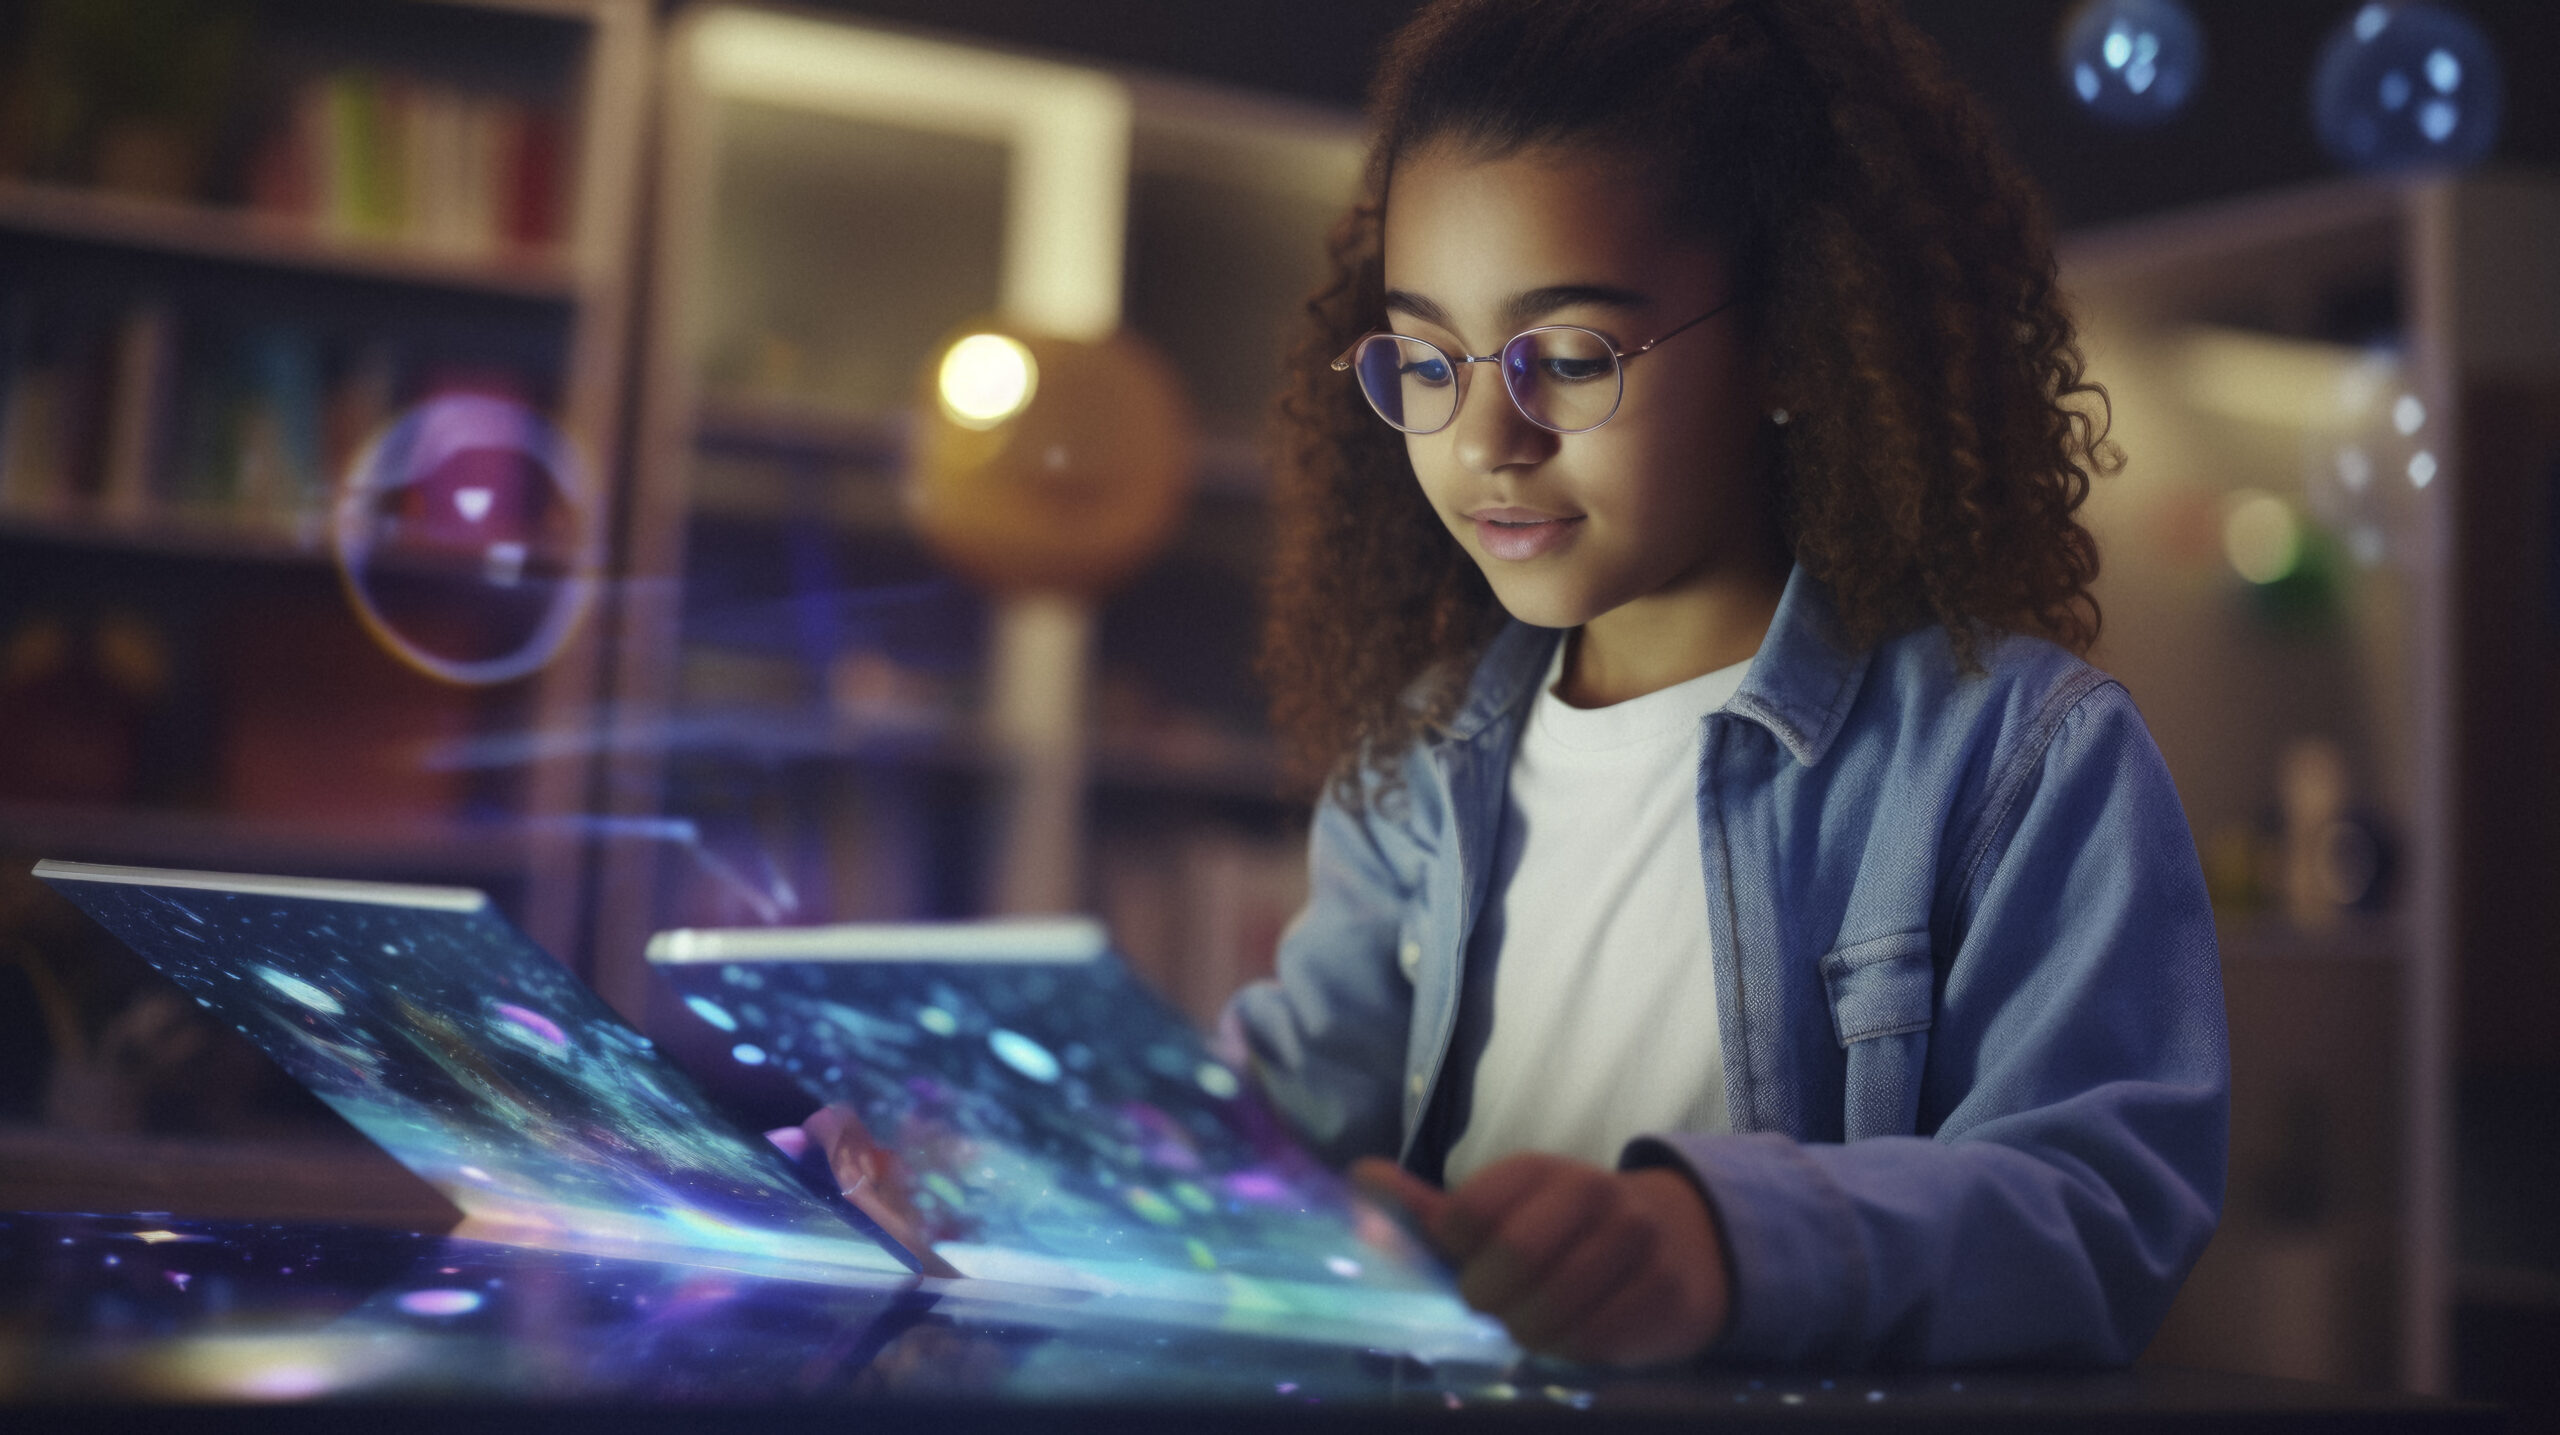 Young girl using futuristic technology, representing child safety online